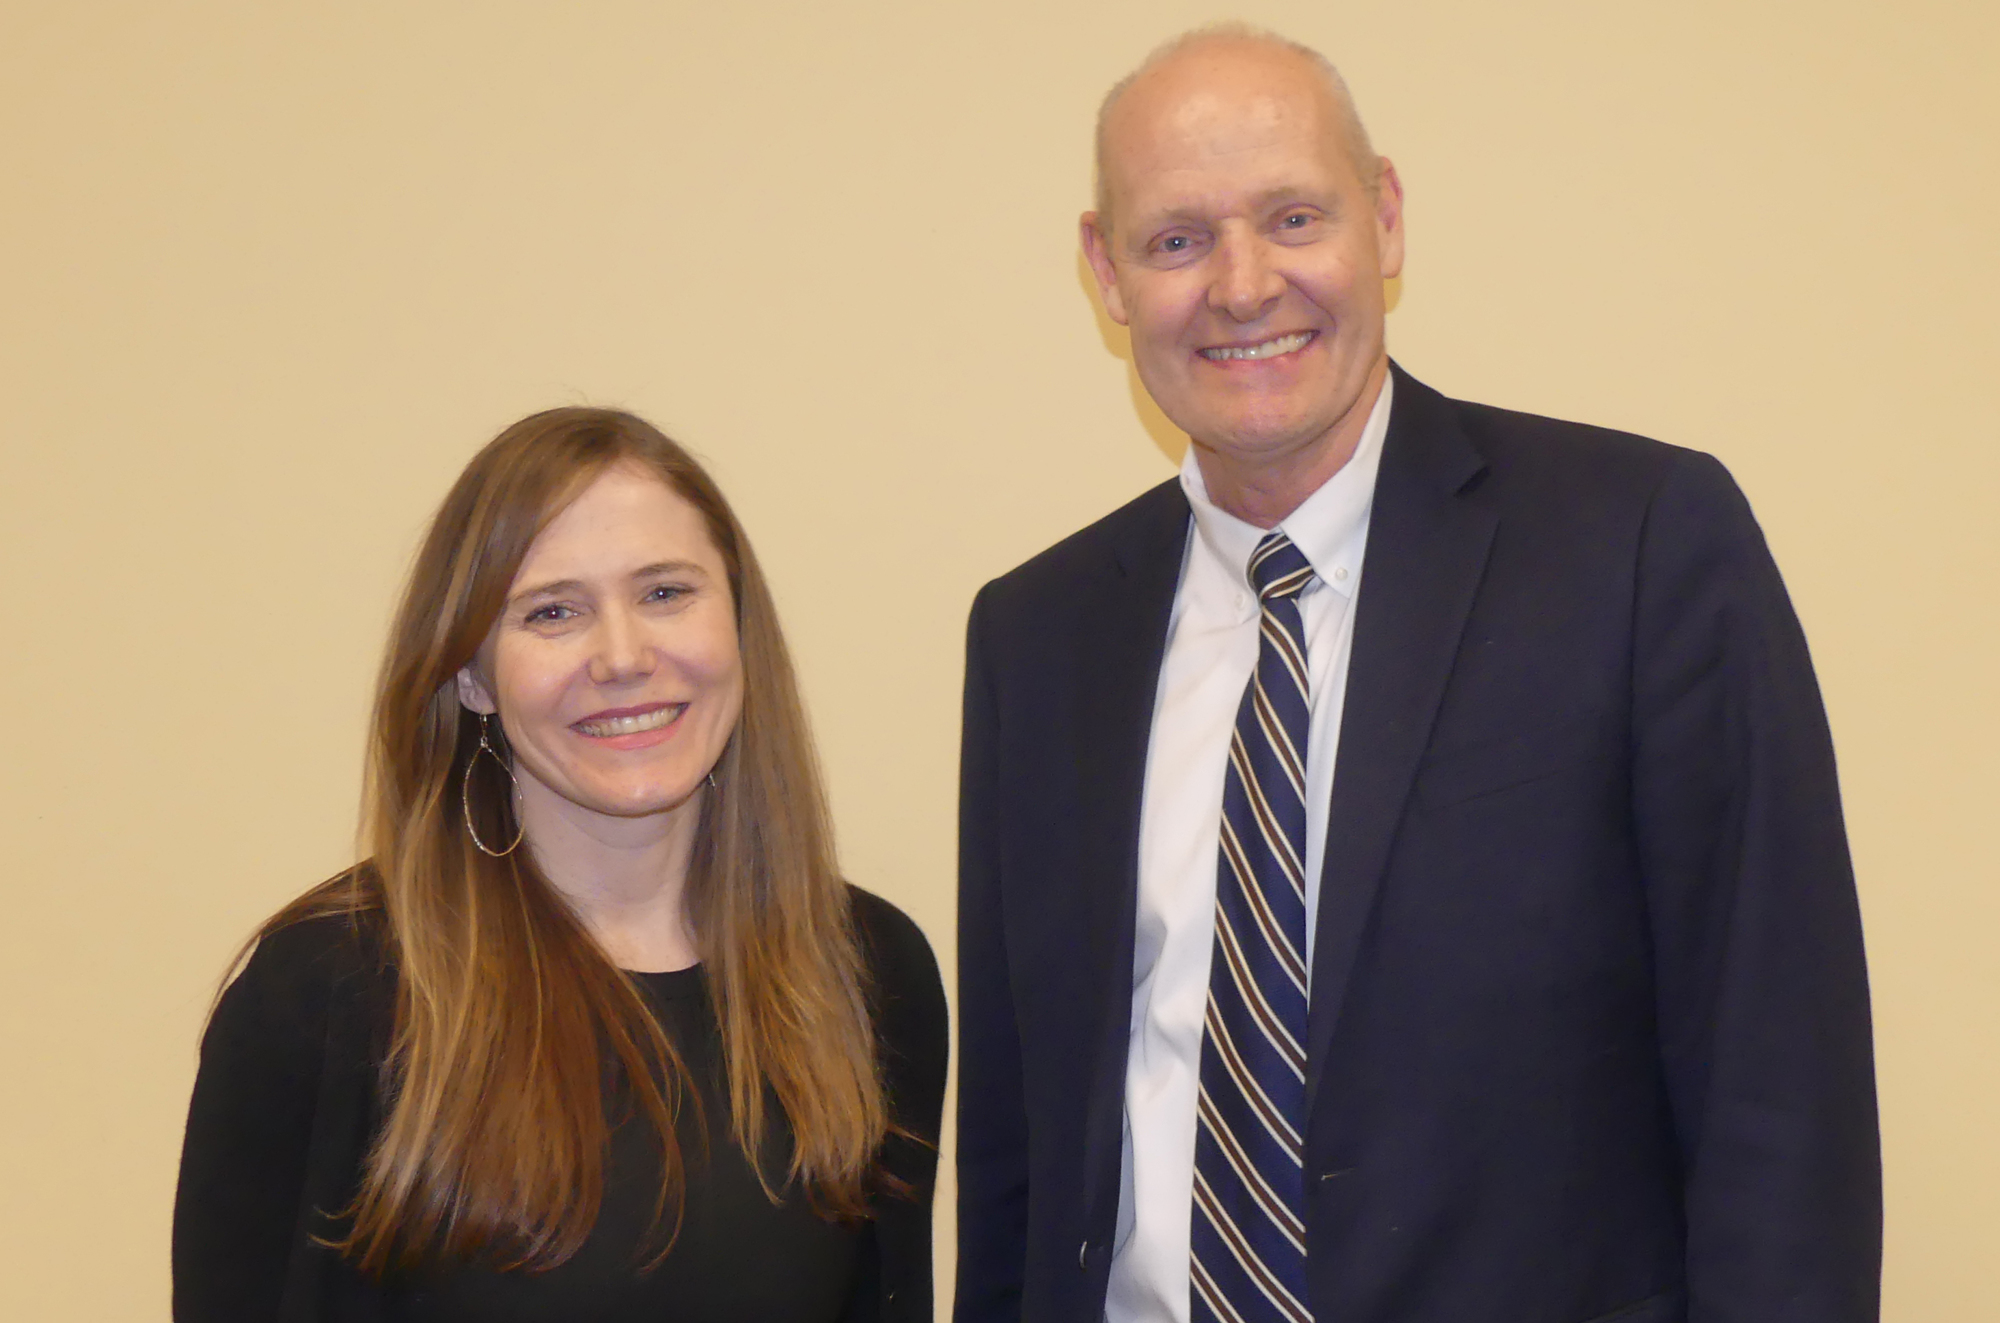 April Lane, perishables, private label and pickup category leader at AmazonFresh and Prime Now, and Jacksonville University Davis College of Business Dean Don Capener.